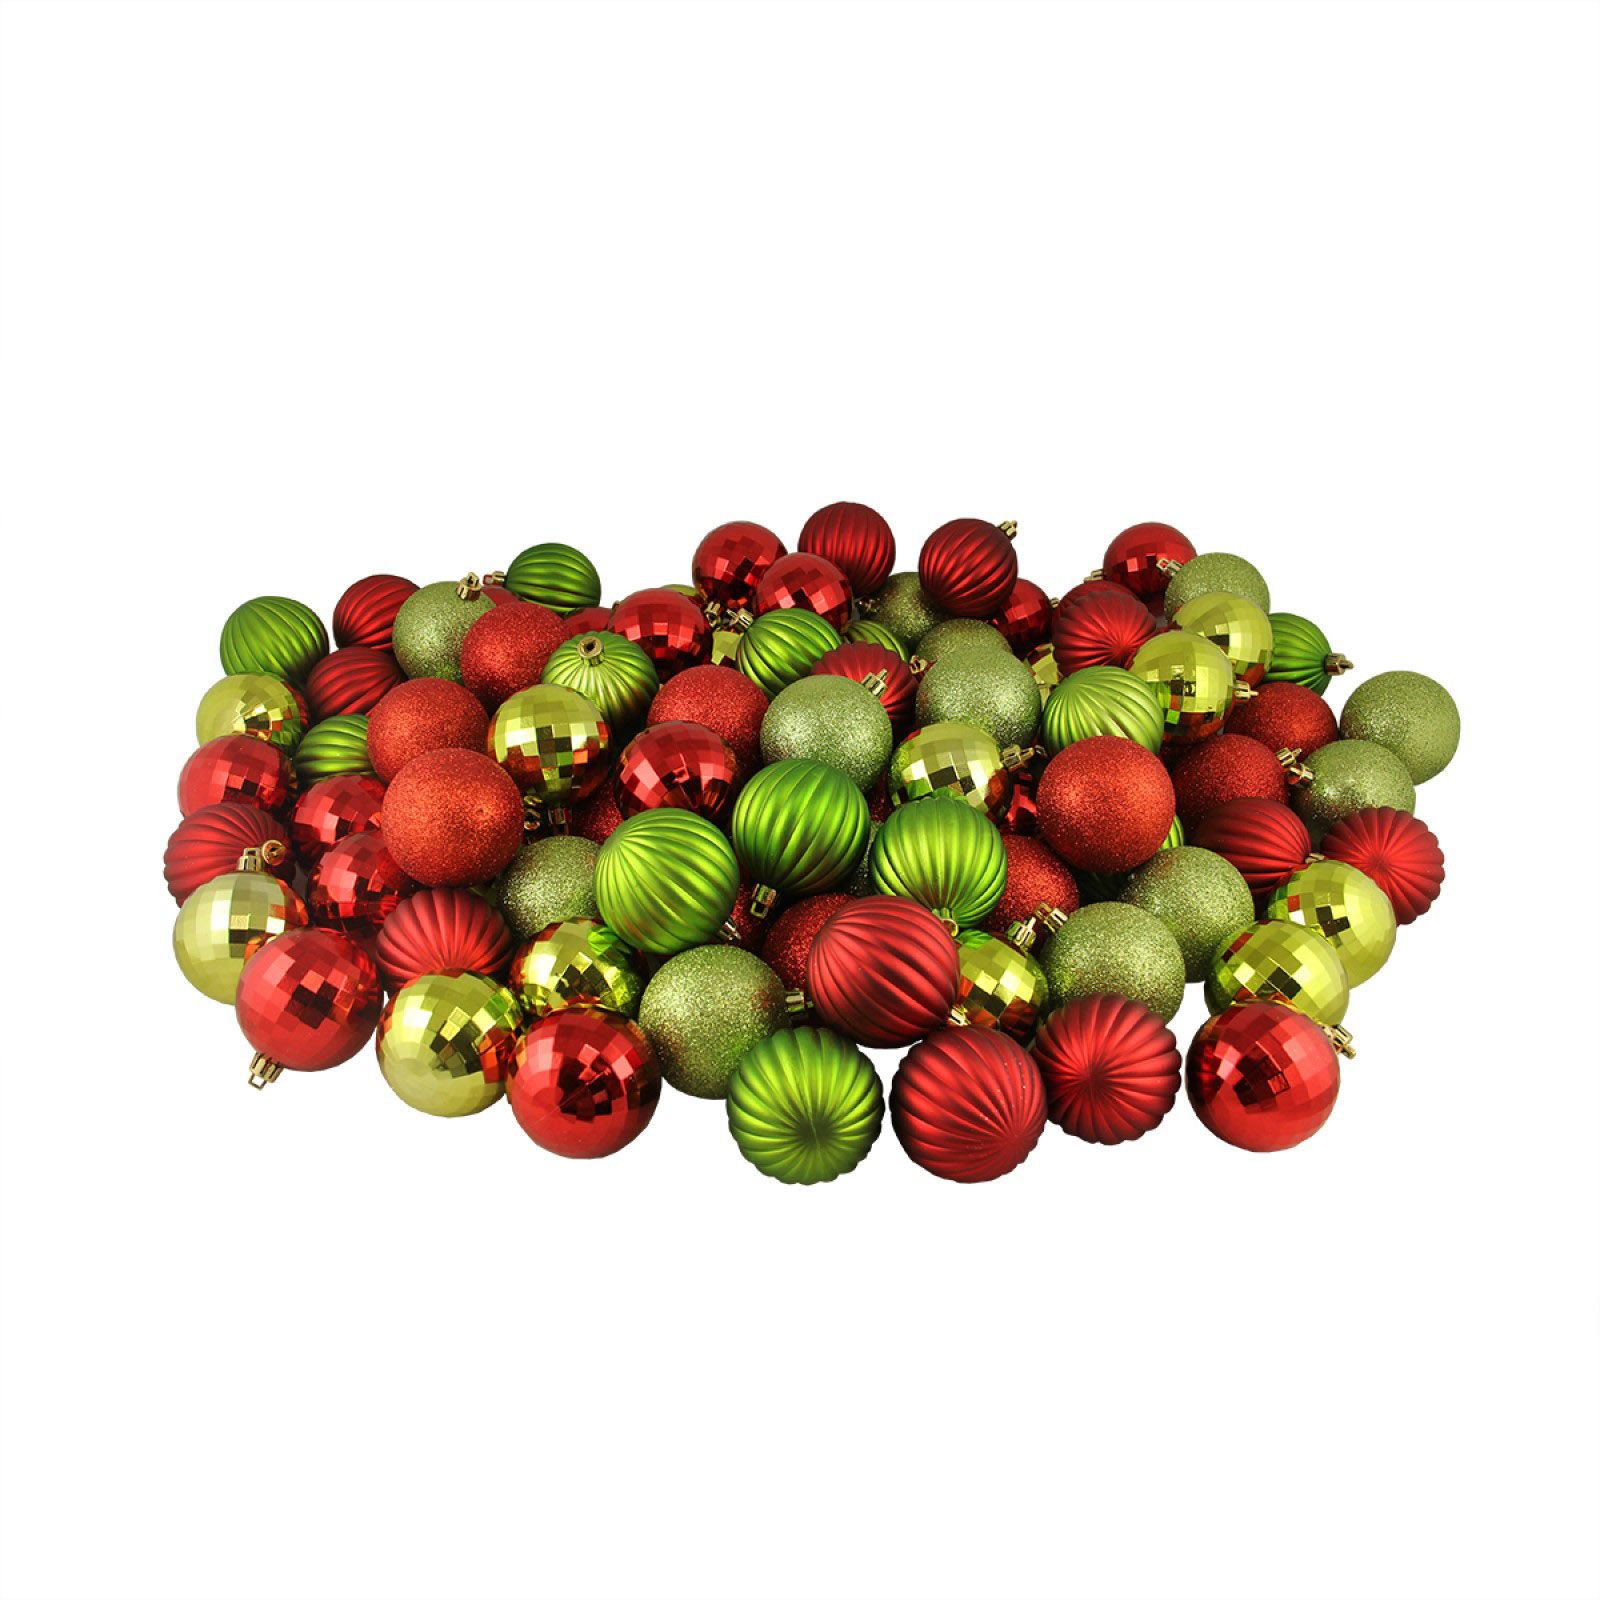 Northlight Shatterproof 3-Finish 2.5&quot; Christmas Ball Ornaments, 100 ct. - Red and Green